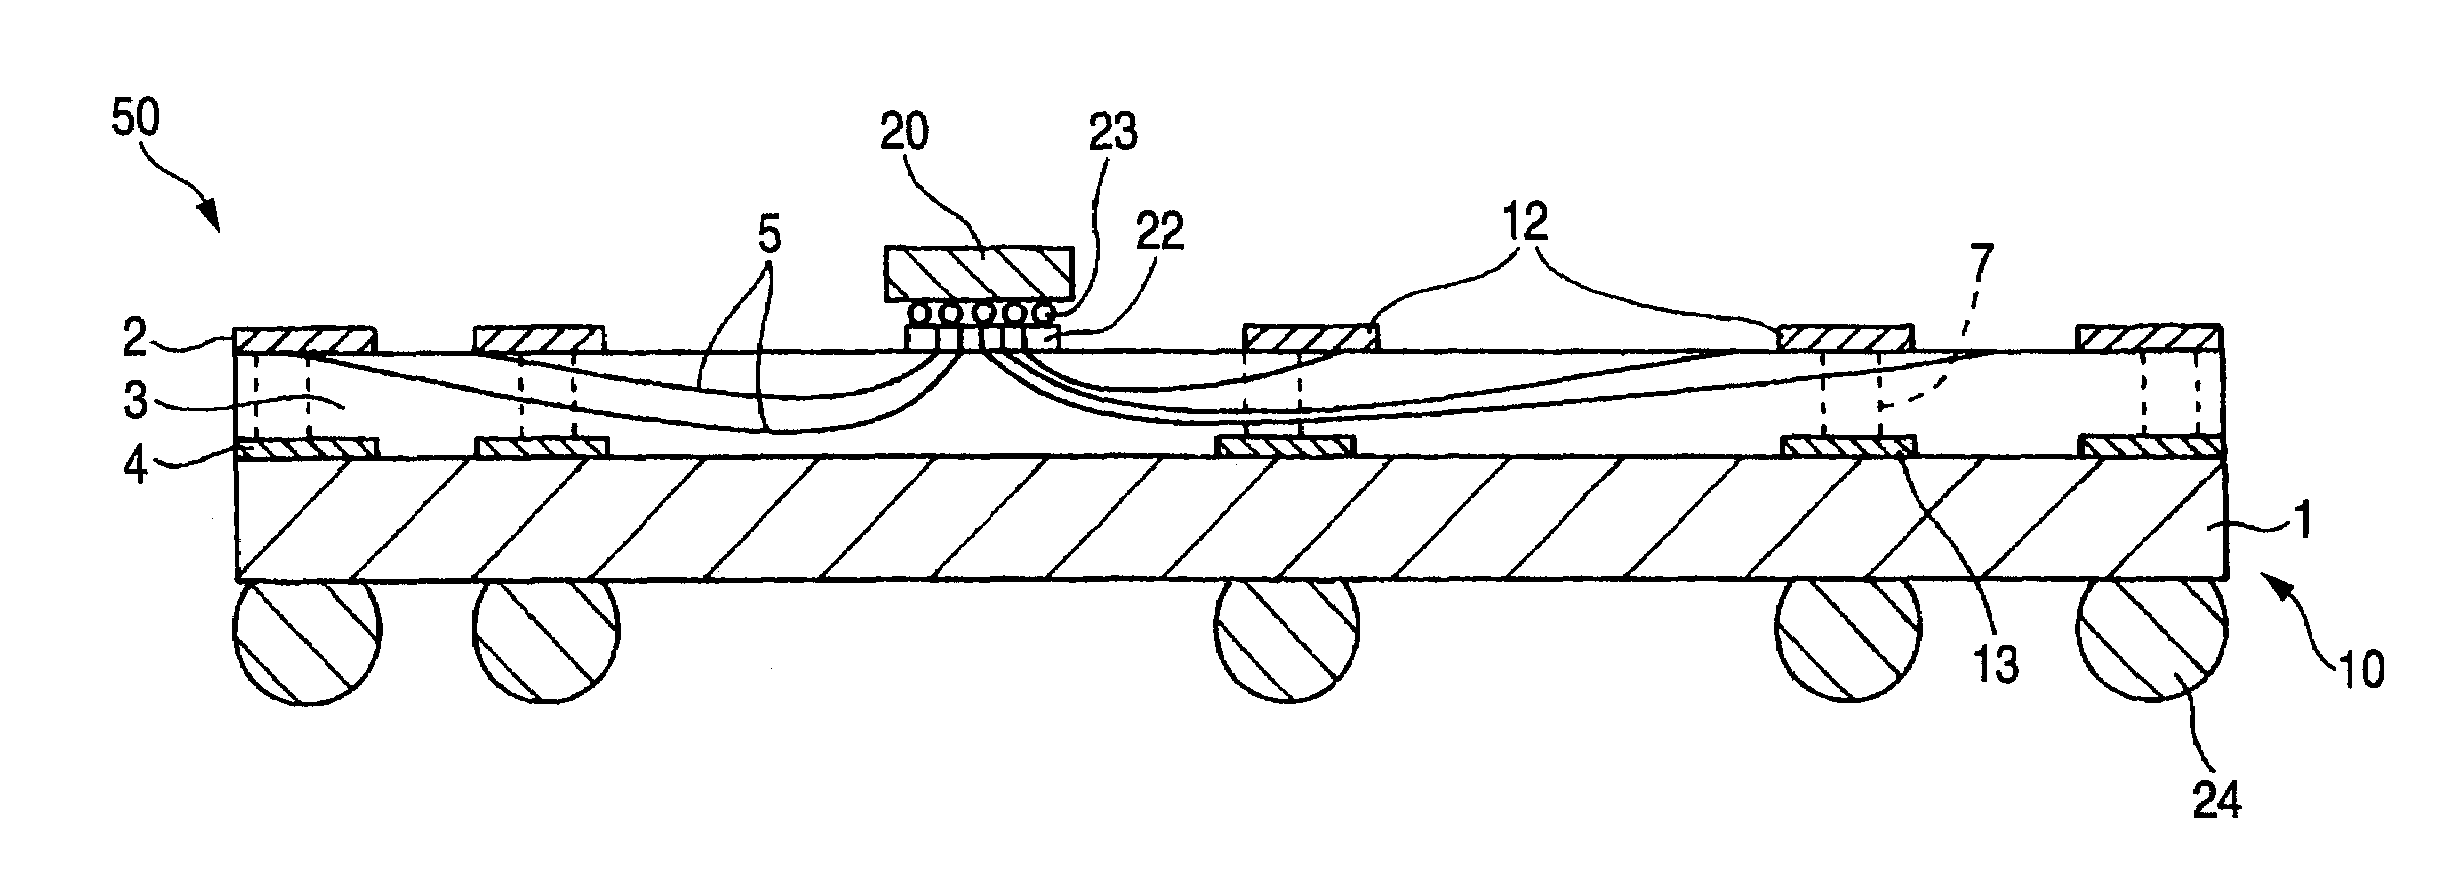 Multilayer wiring substrate, method of manufacturing the same, and semiconductor device